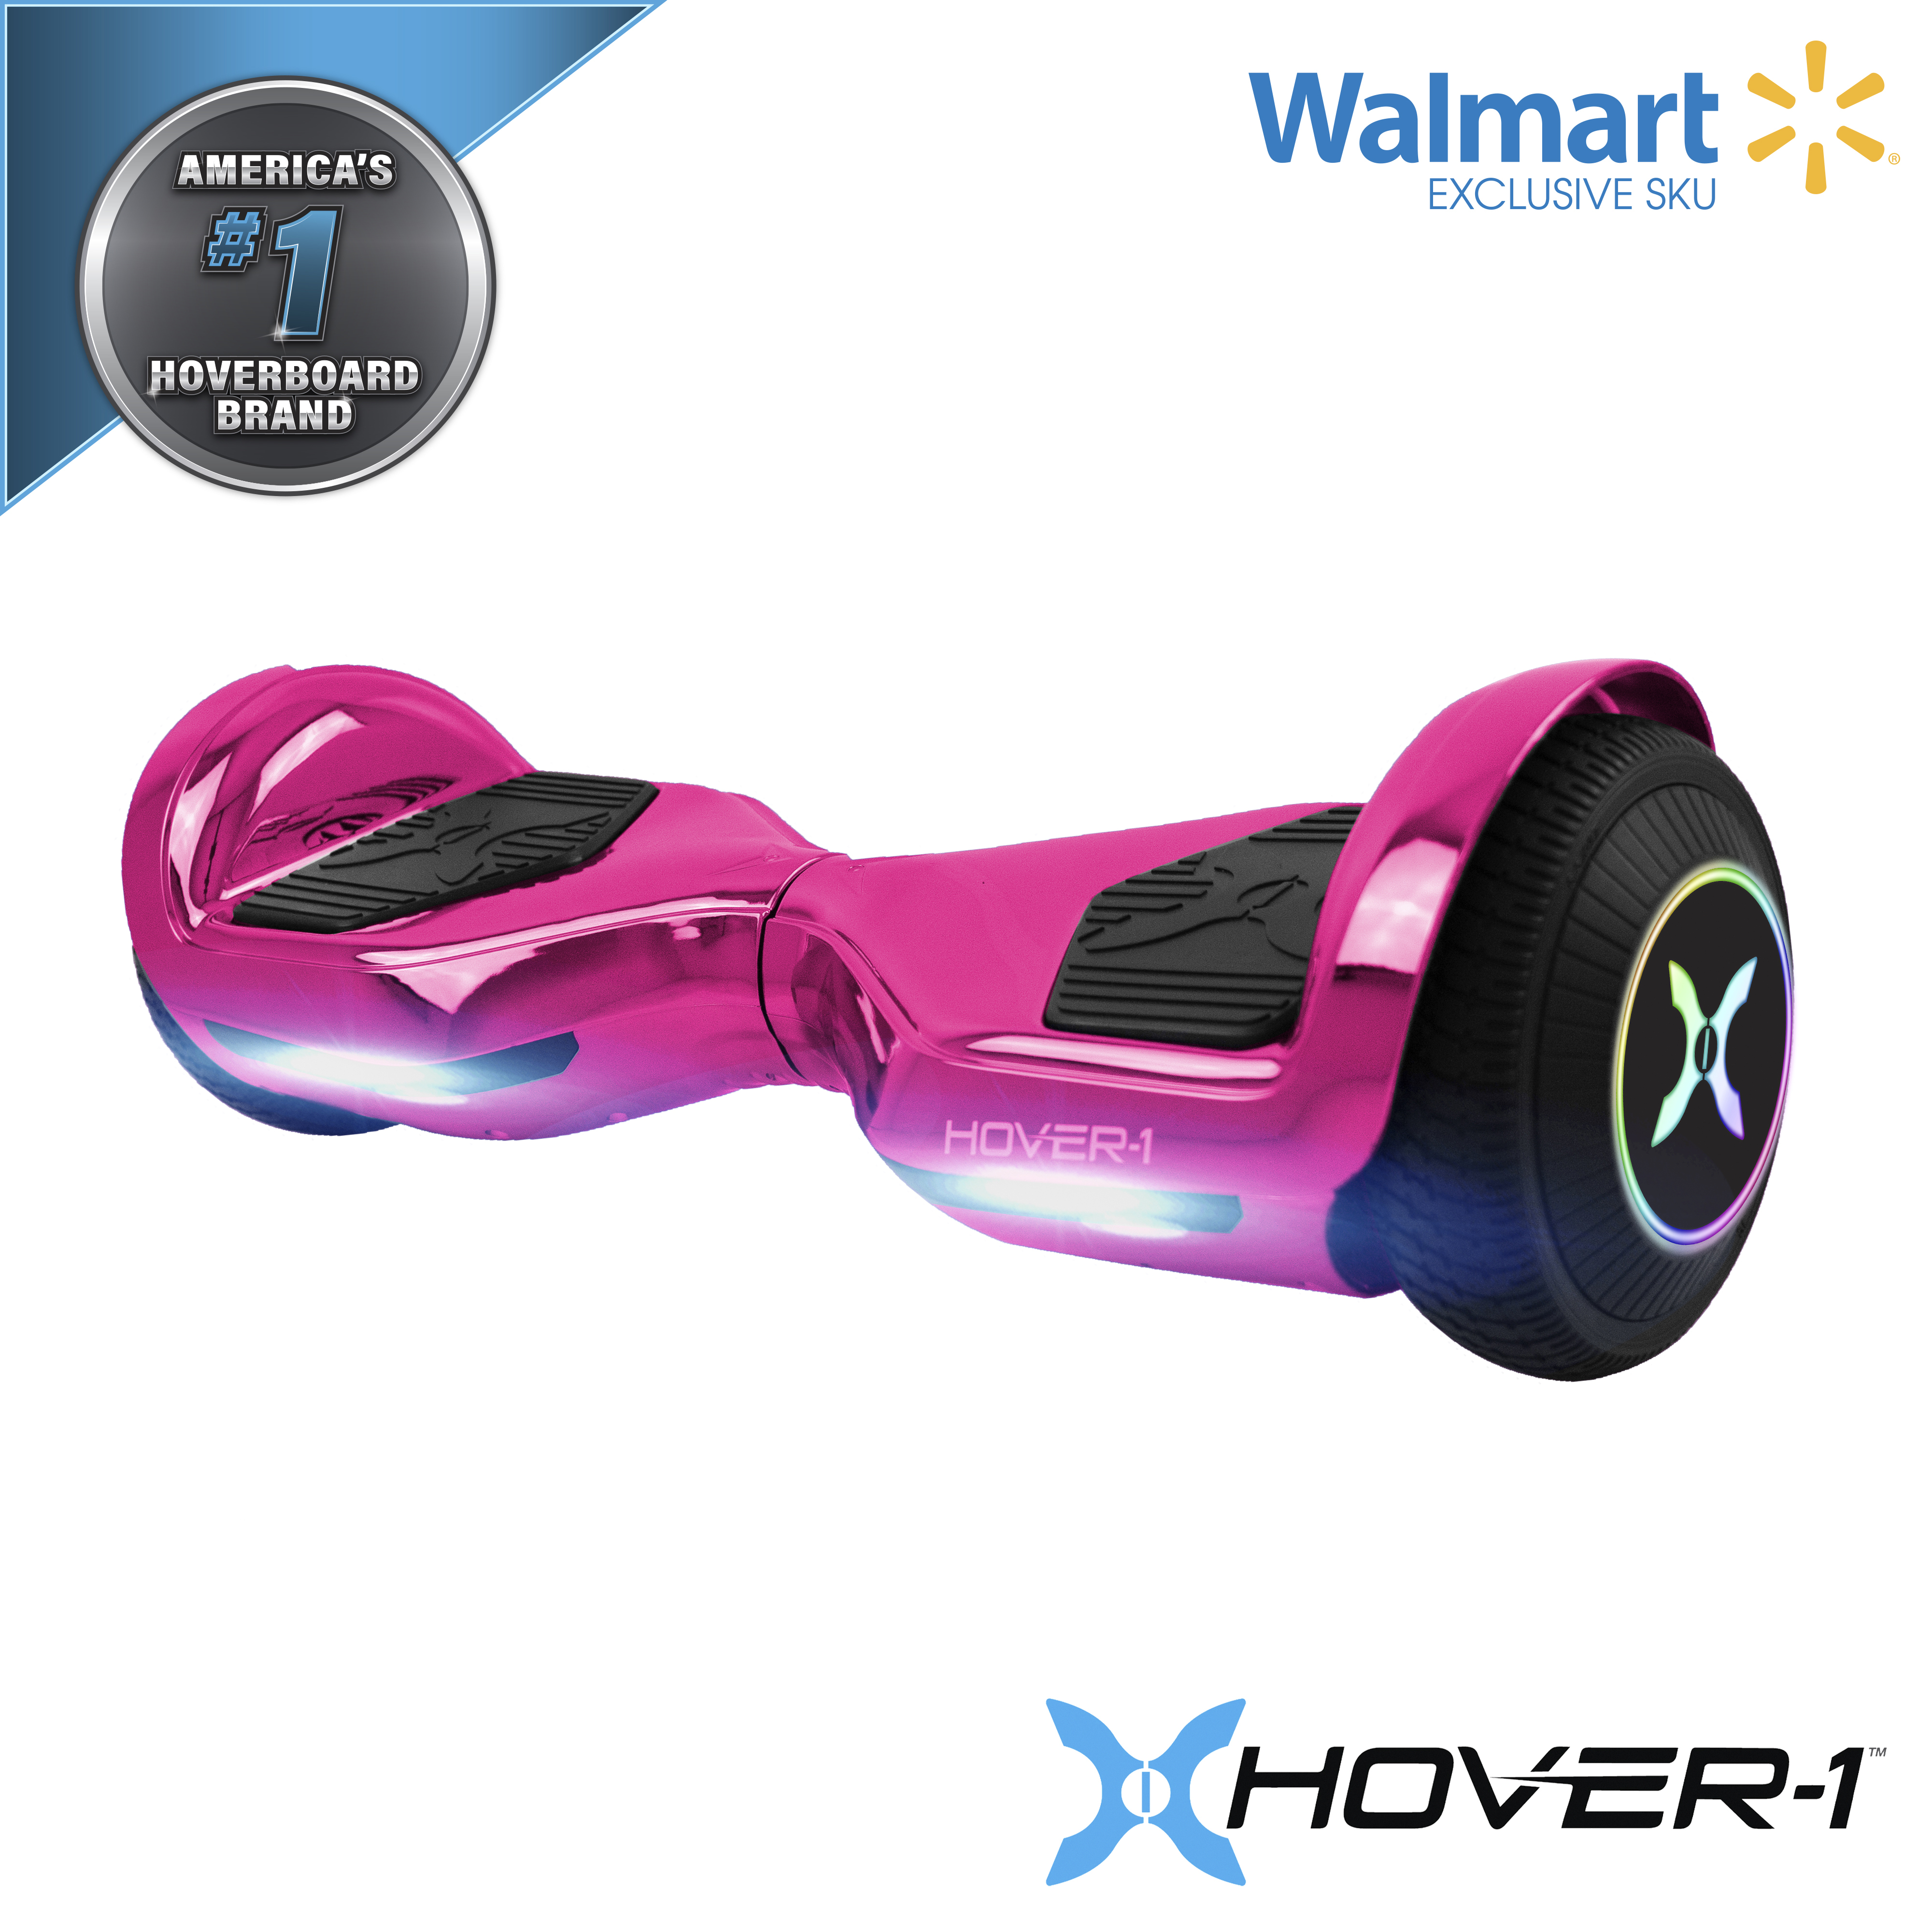 Hover-1 Allstar UL Certified Electric Hoverboard w/ 6.5" Wheels and LED Lights - Pink - image 5 of 6